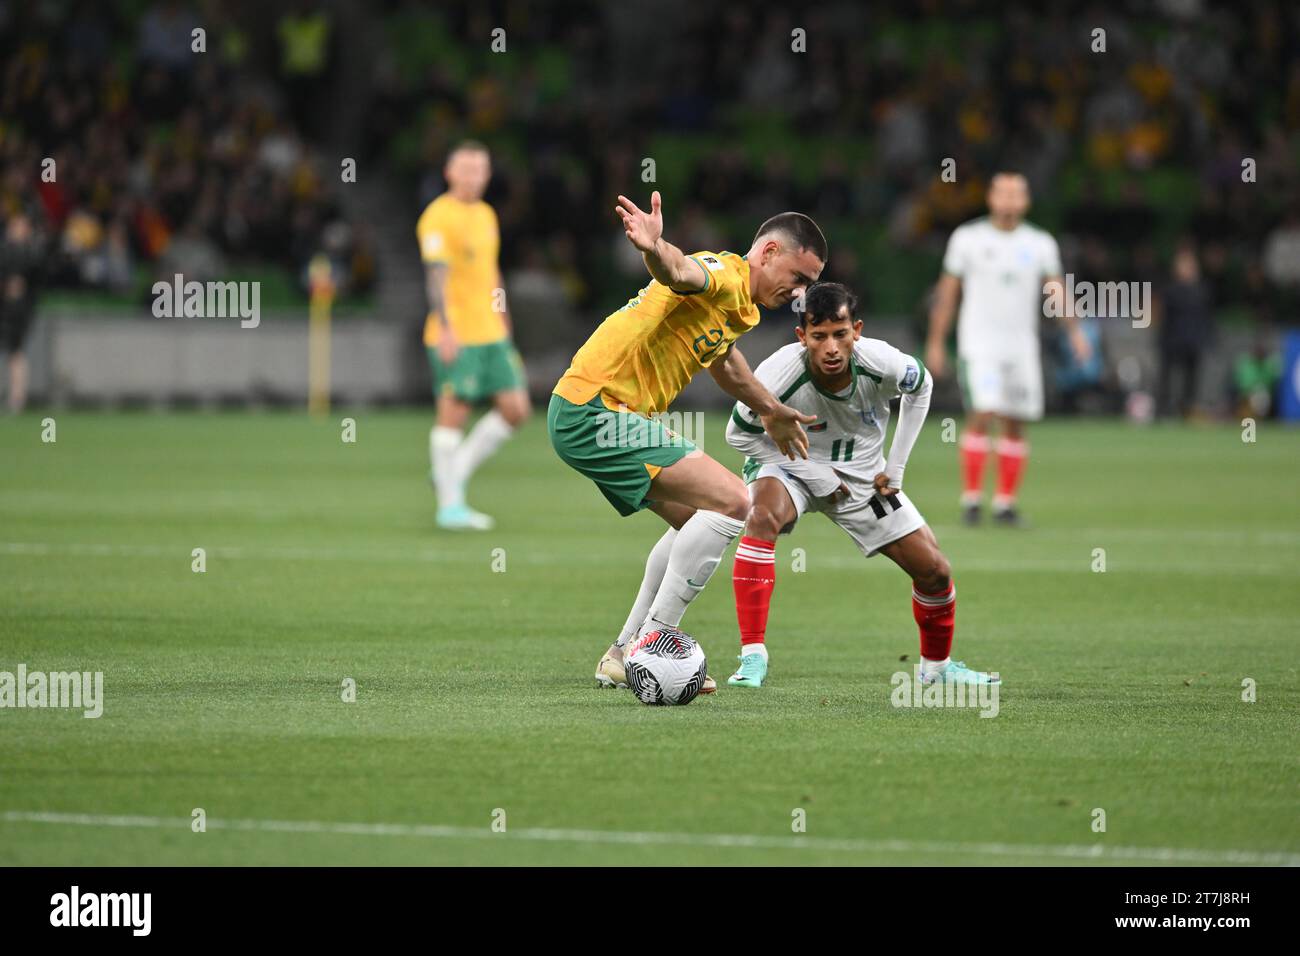 MELBOURNE, AUSTRALIA 16th November 2023. Pictured: Australian defender Lewis Miller(20) (left) takes on Bangladesh forward Foysal Ahmed Fahim (11) (right) at the FIFA World Cup 2026 AFC Asian Qualifiers R1 Australia v Bangladesh at Melbourne’s rectangular stadium. Credit: Karl Phillipson/Alamy Live News Stock Photo